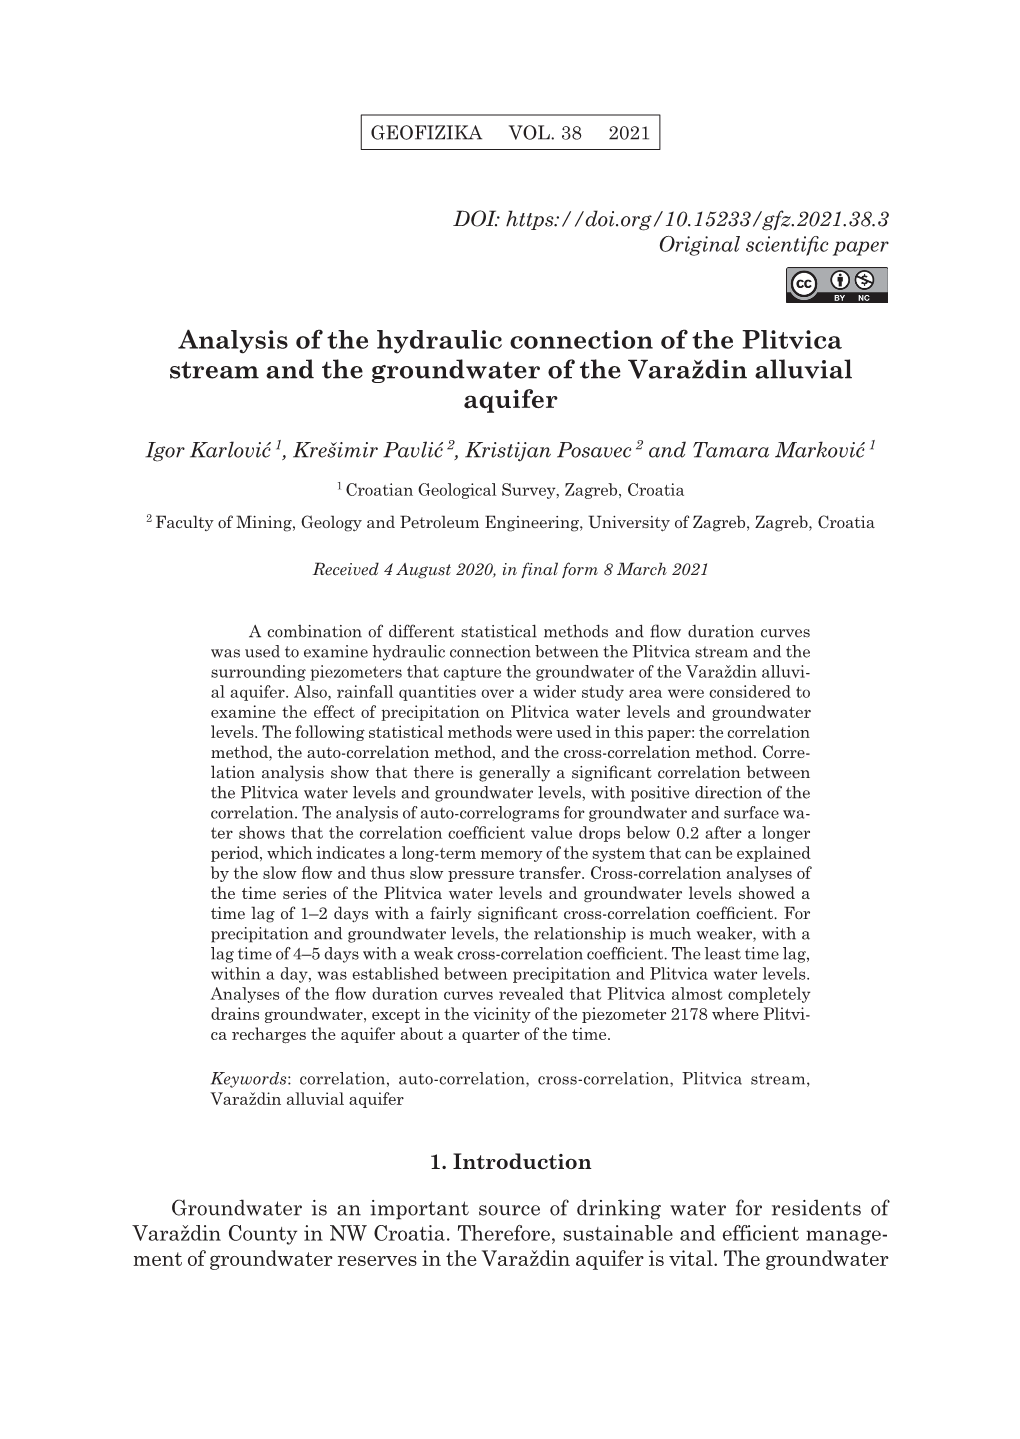 Analysis of the Hydraulic Connection of the Plitvica Stream and the Groundwater of the Varaždin Alluvial Aquifer